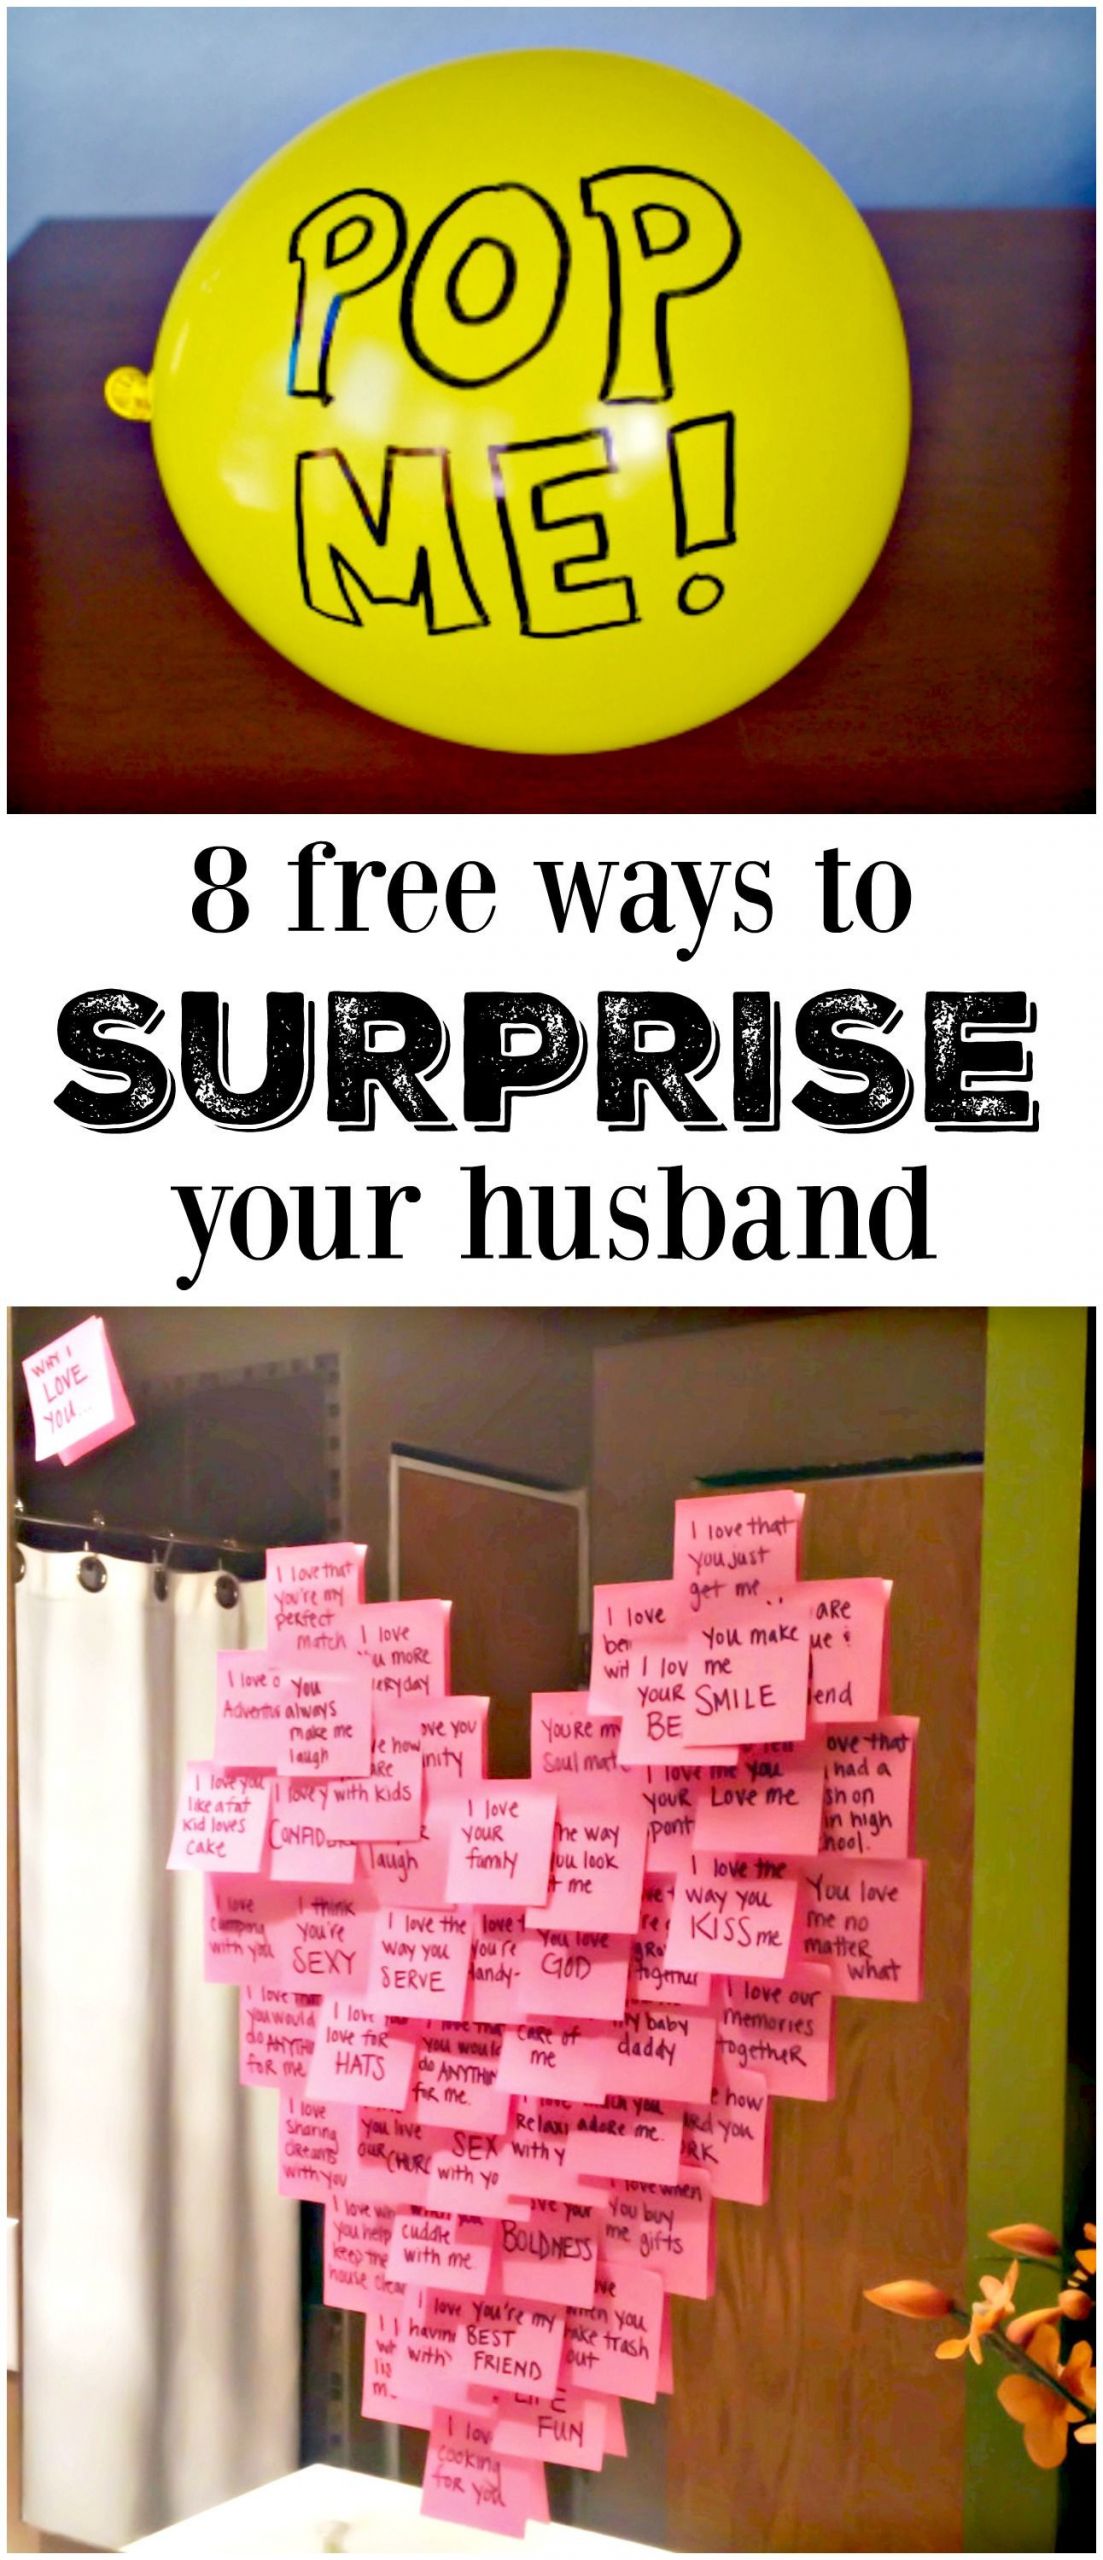 Valentine Day Gift Ideas For Husband
 8 Meaningful Ways to Make His Day